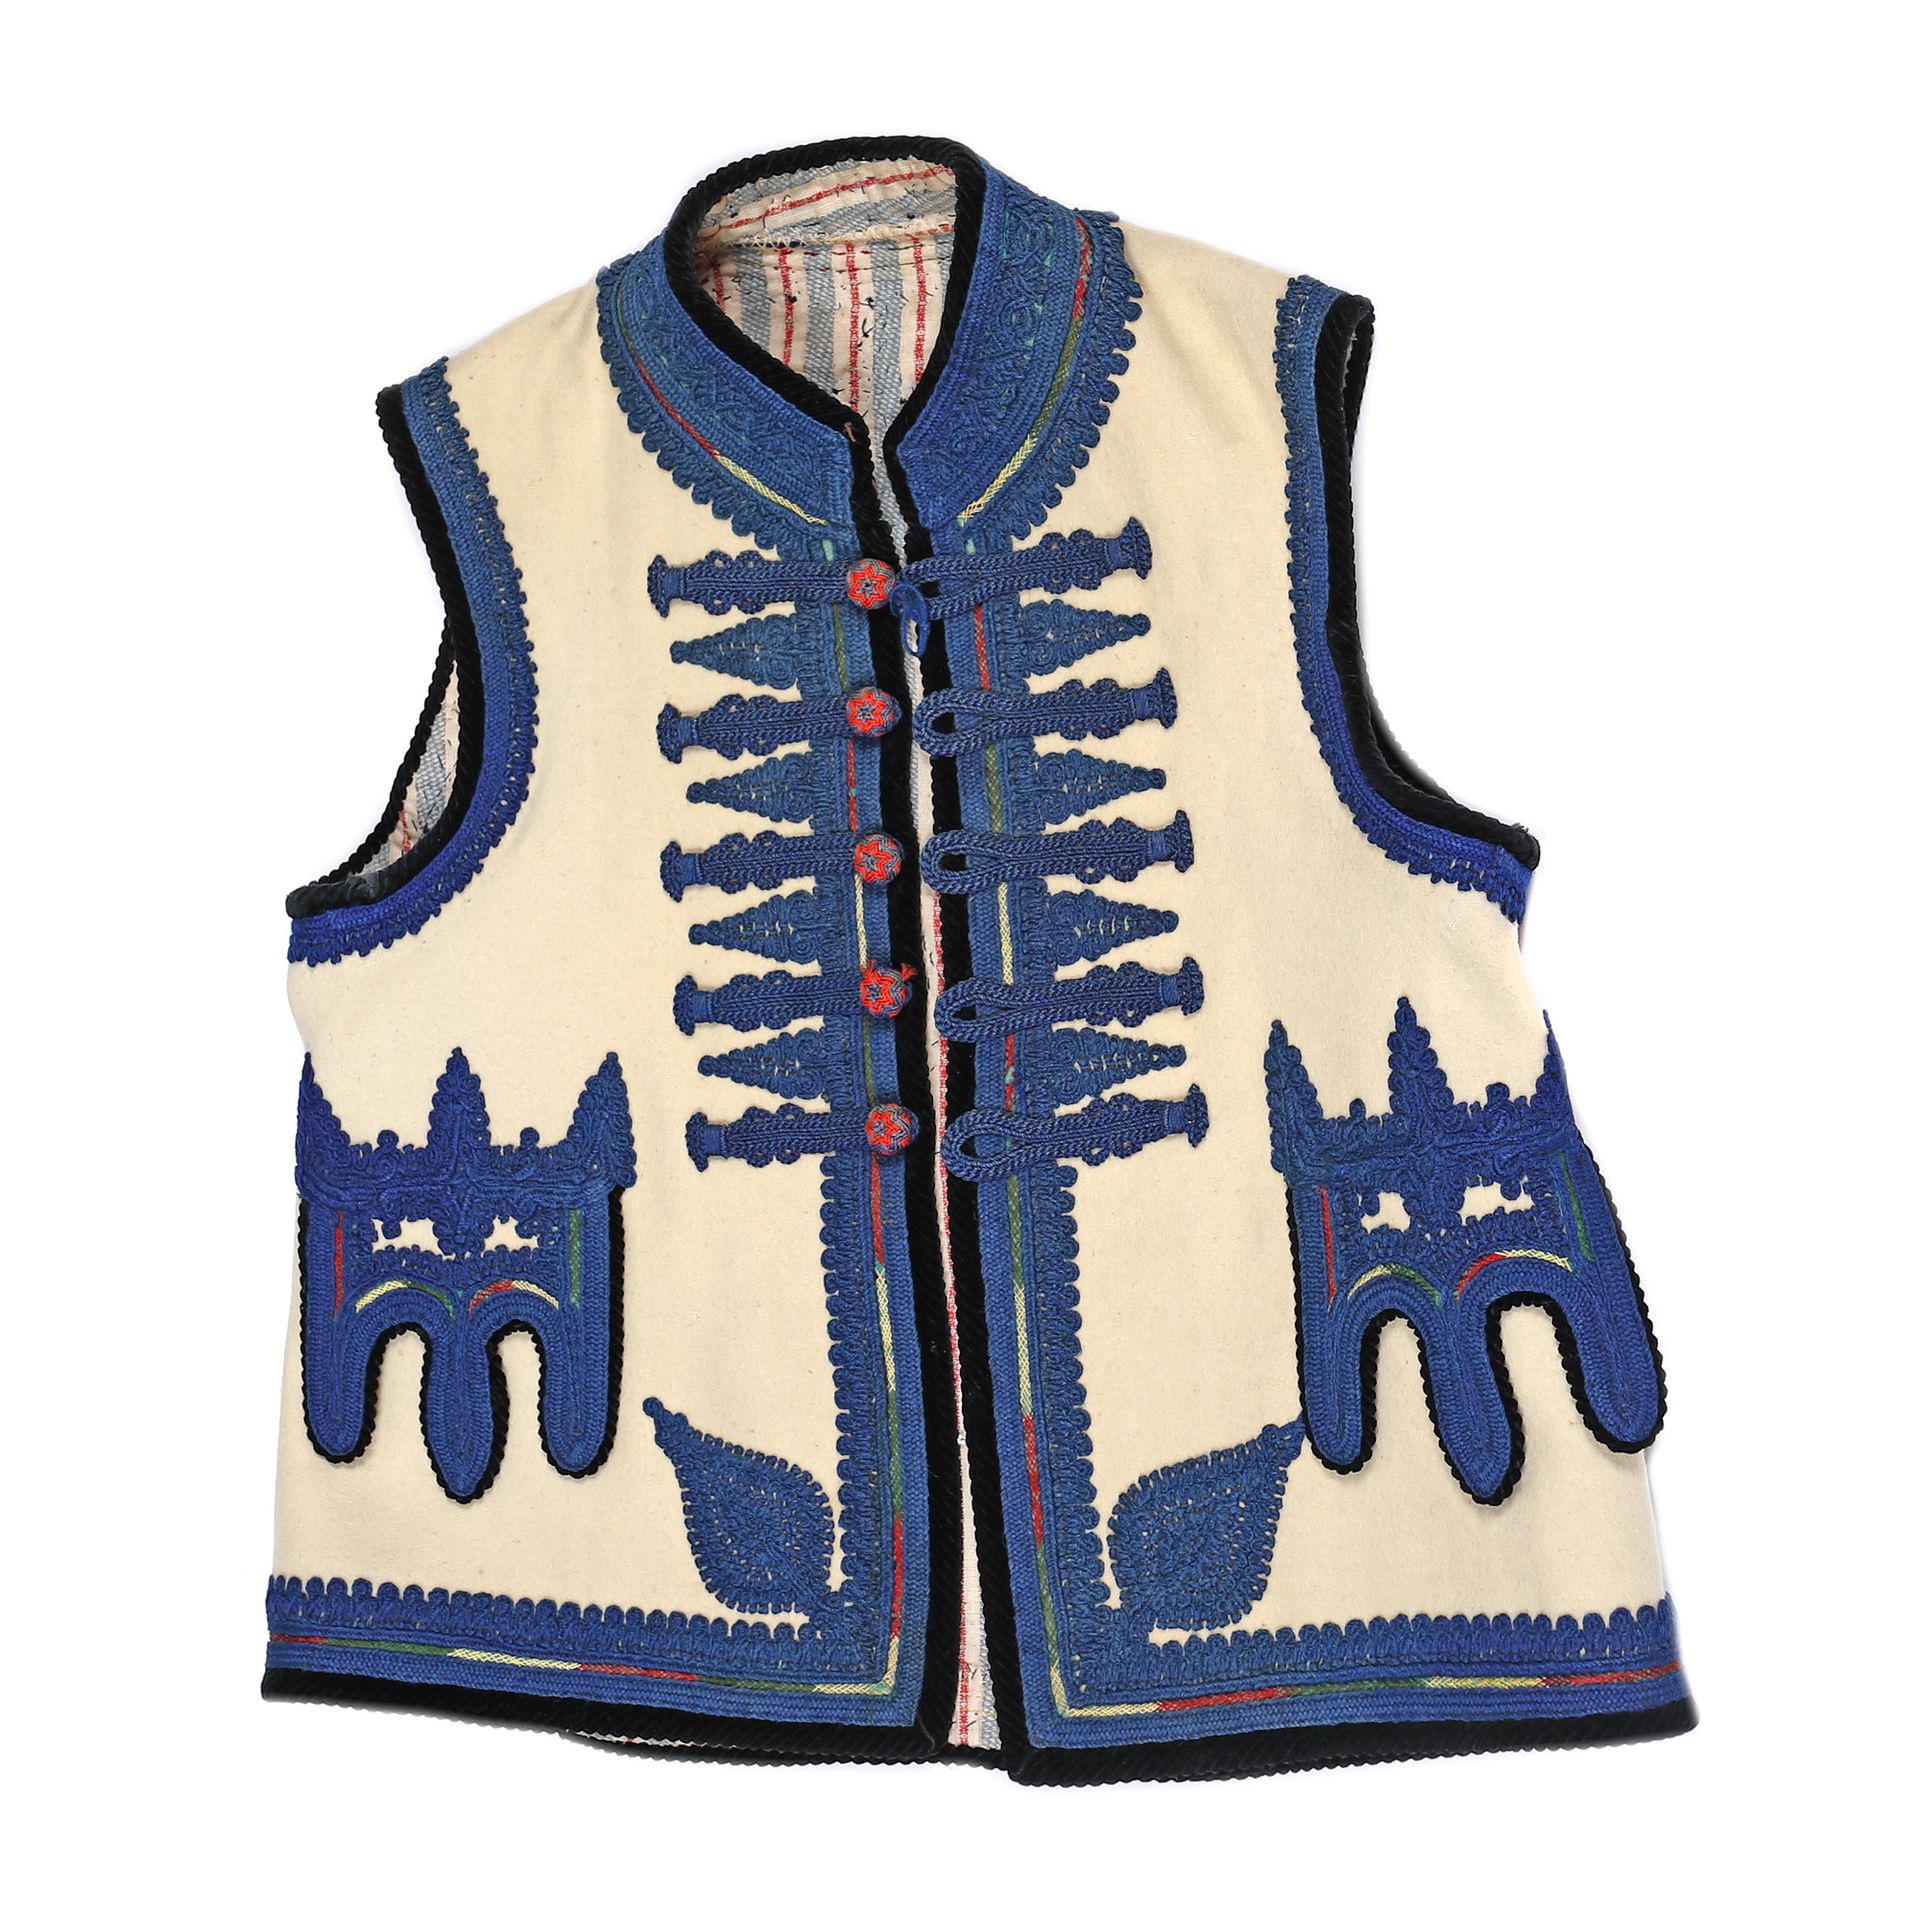 Vest from Banat, made of wool, ca. 1910 羊毛